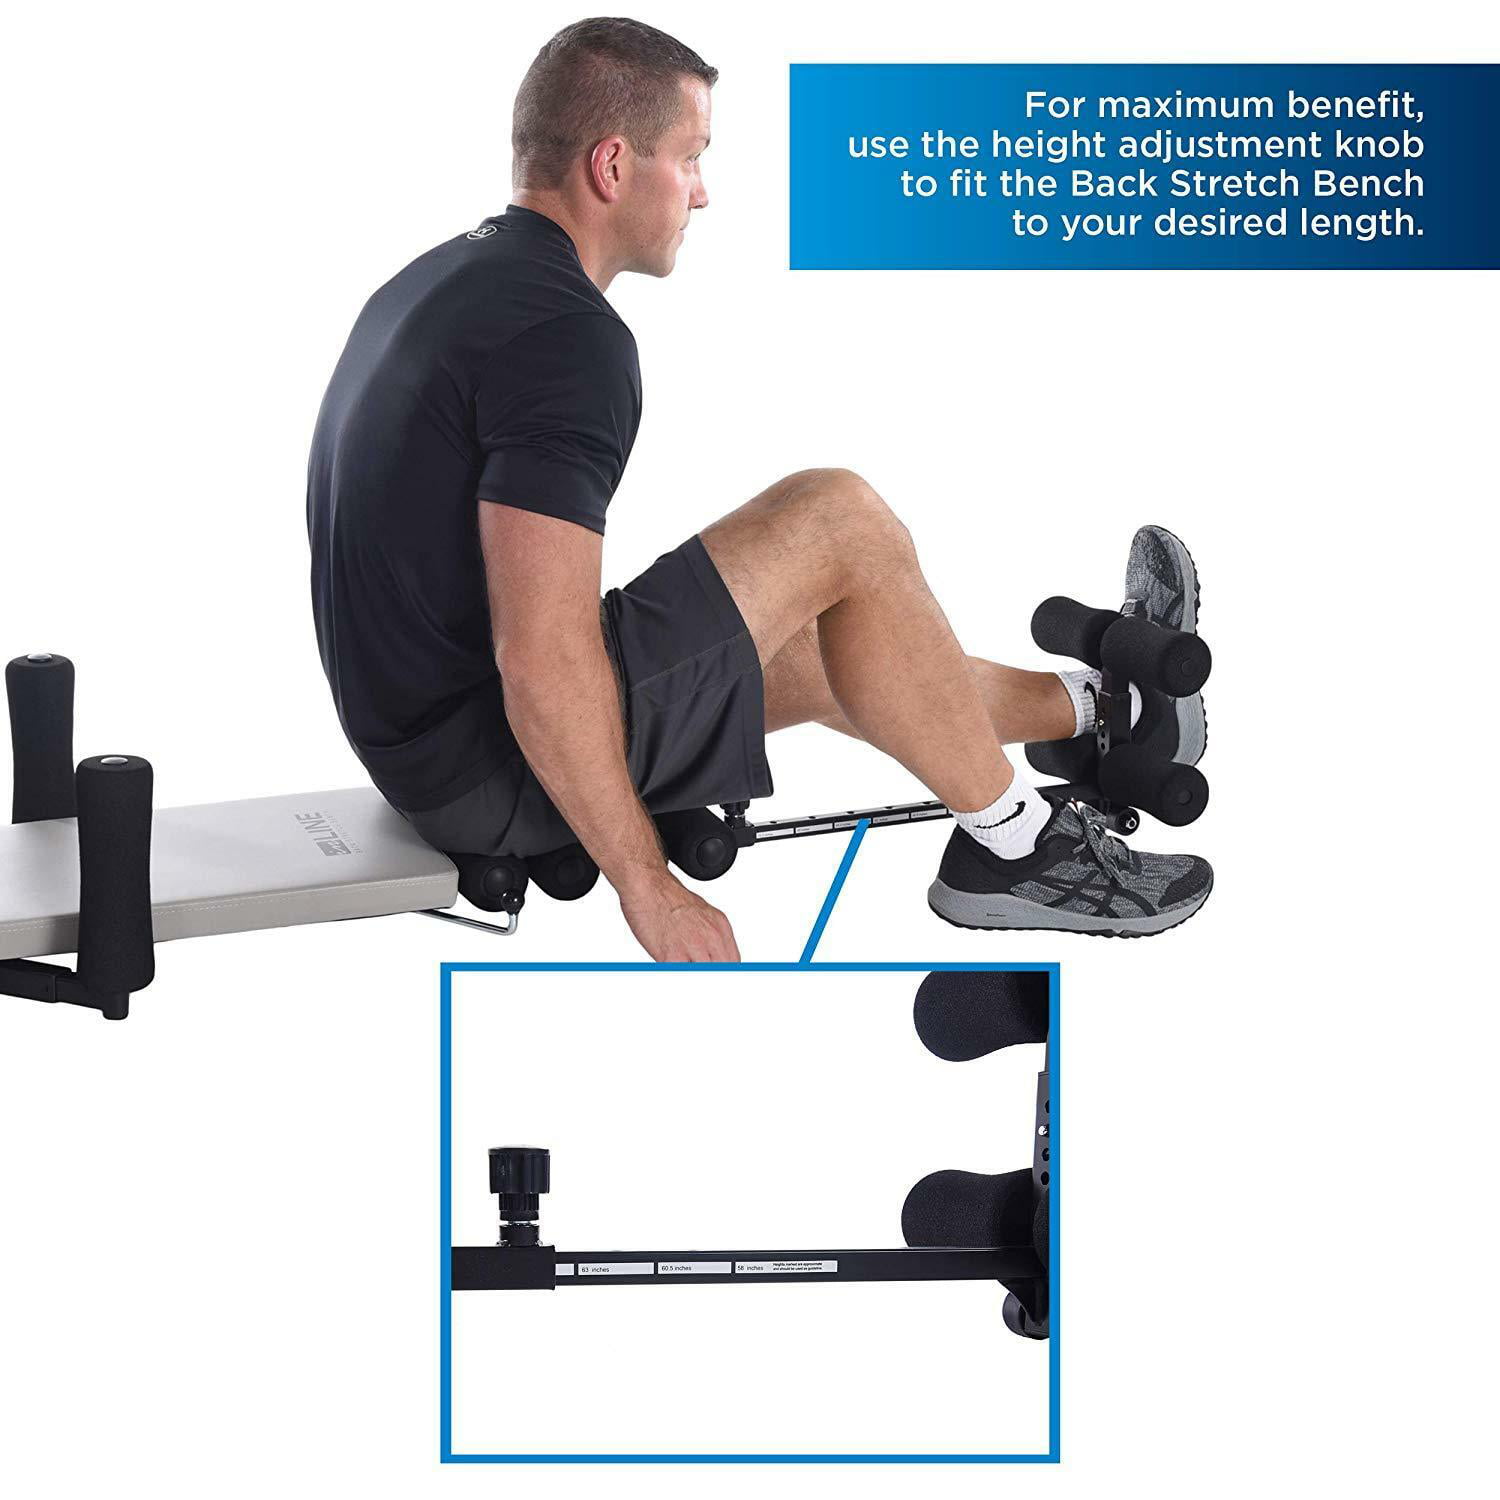 Inline Stretch Bench with Cervical Traction Bed Go Stretcher Bench Adjustable Fitness Workout for Full Body Inversion Table Home Gym Equipment Yinguo Strength Trainning Back/Neck Stretch Bench 